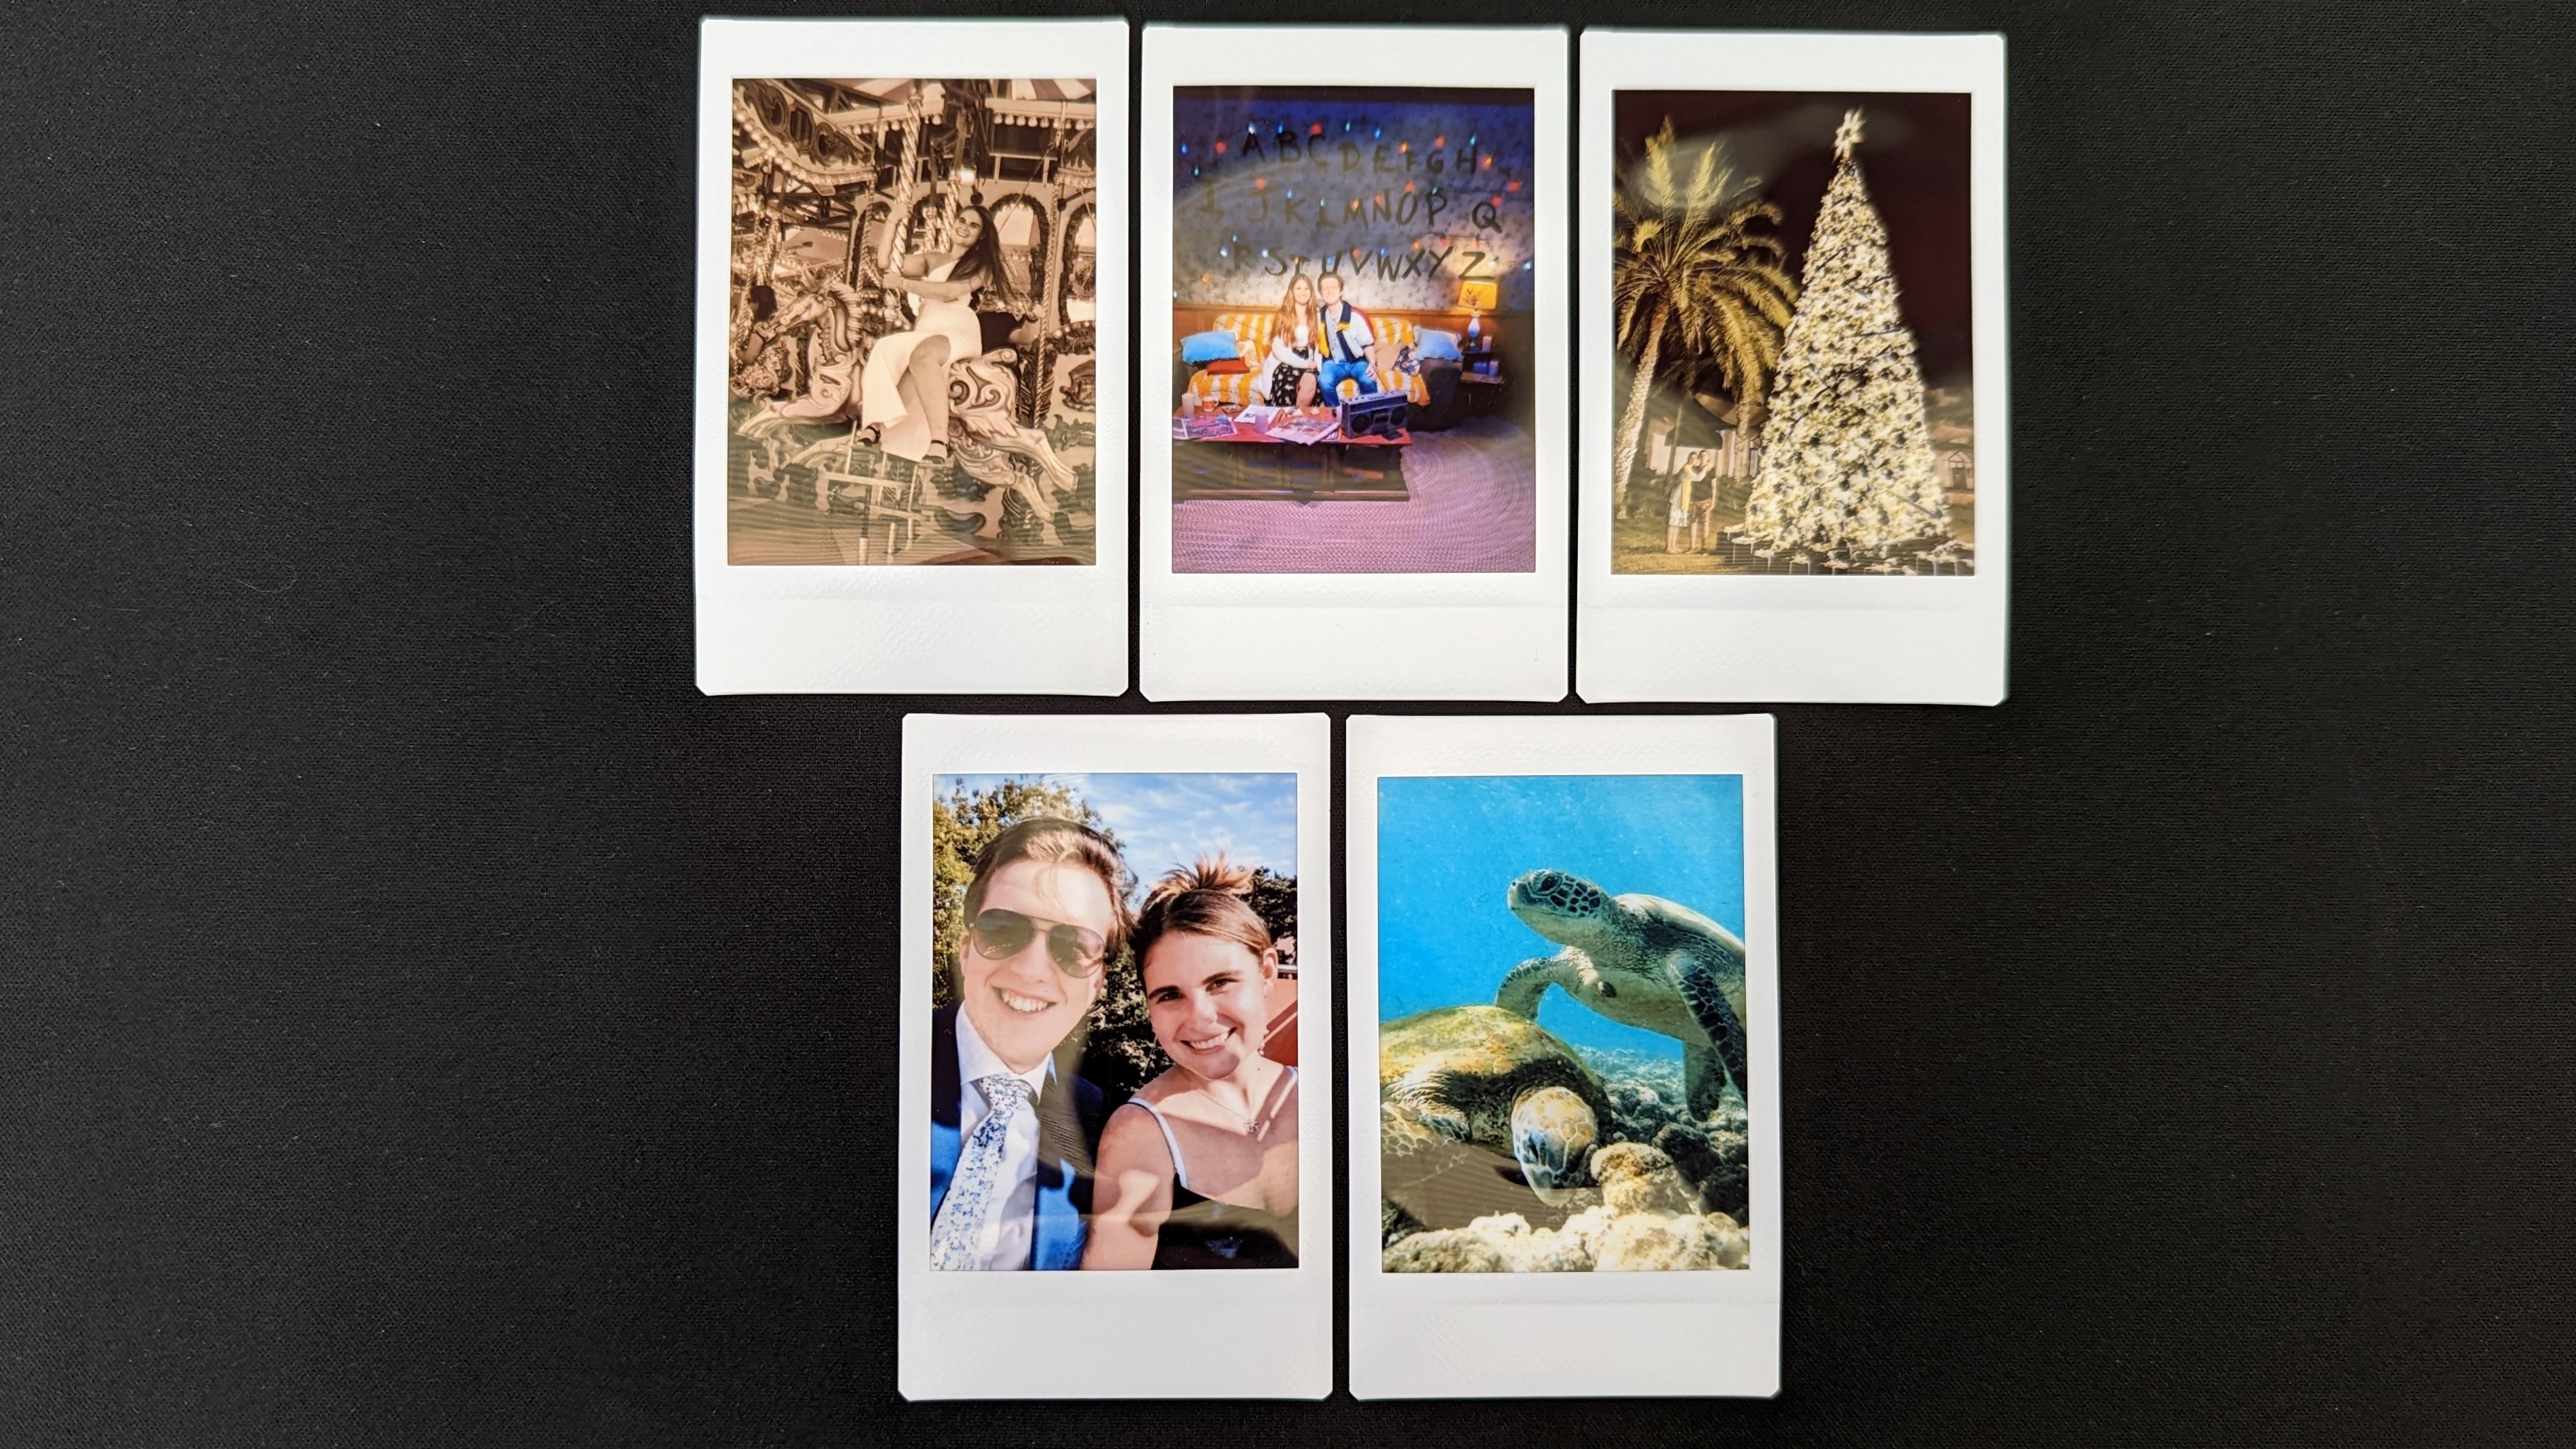 Photos taken with the Instax Mini Link 2, they include a photo of turtles under the sea and a woman riding a merry-go-round.